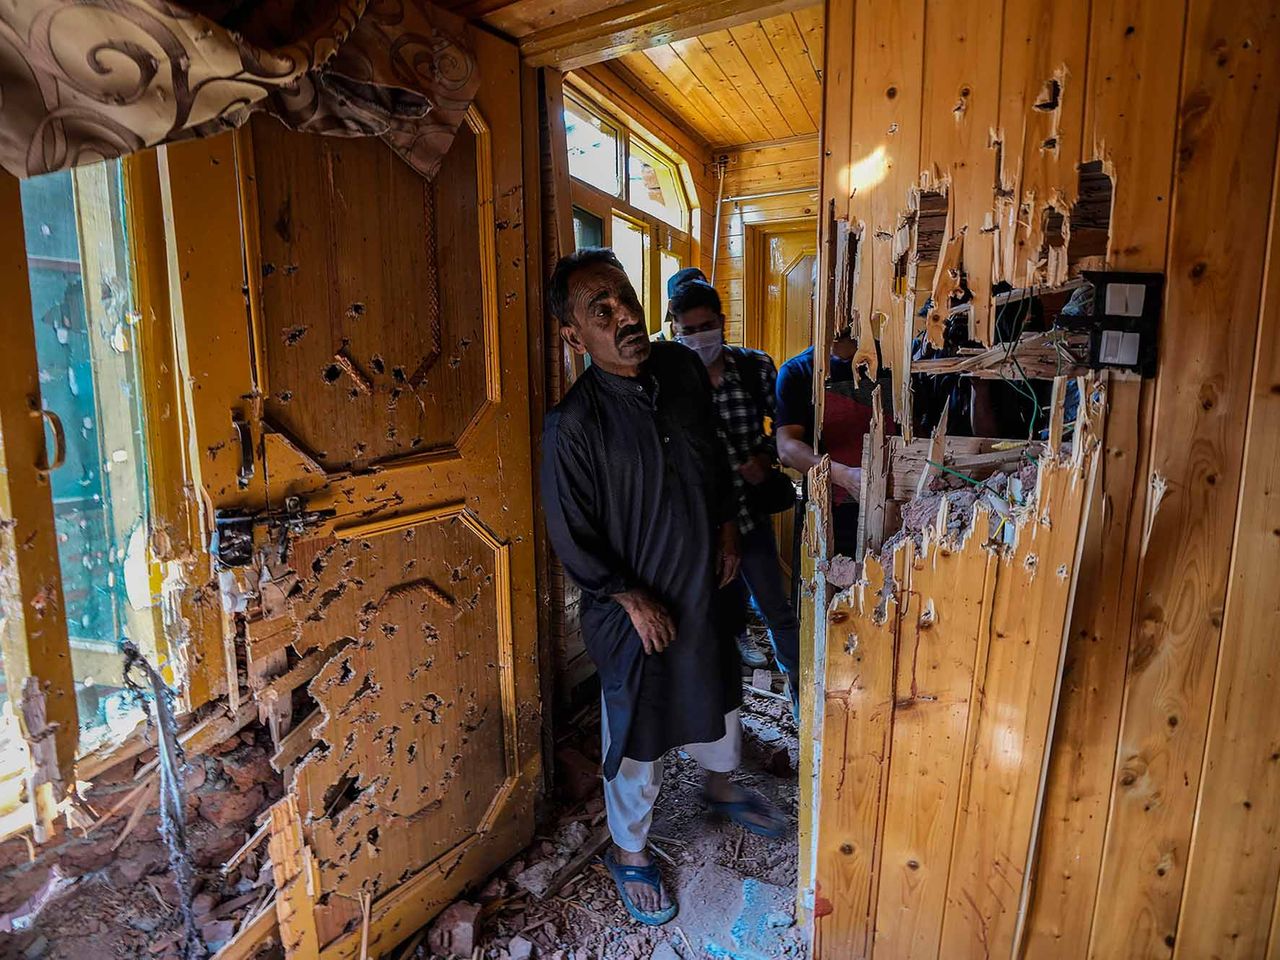 A local resident look inside a damaged room at the site of a gun-battle in Srinagar, Indian controlled Kashmir, Sunday, April 10, 2022. Indian government forces killed two suspected rebels in disputed Kashmir on Sunday, officials said. This project documents ongoing unrest in the long-disputed region of Kashmir, dating back to 1947, when India and Pakistan gained independence from Britain. Both nations claim Kashmir in its entirety, and each administers a portion of the region. In Indian-administered Kashmir, rebels have been fighting Indian rule for decades, seeking to unite the territory, either under Pakistani rule or as an independent country. India says that Pakistan supports armed insurgency in Kashmir. Pakistan denies the charge, saying it provides moral and diplomatic support only.